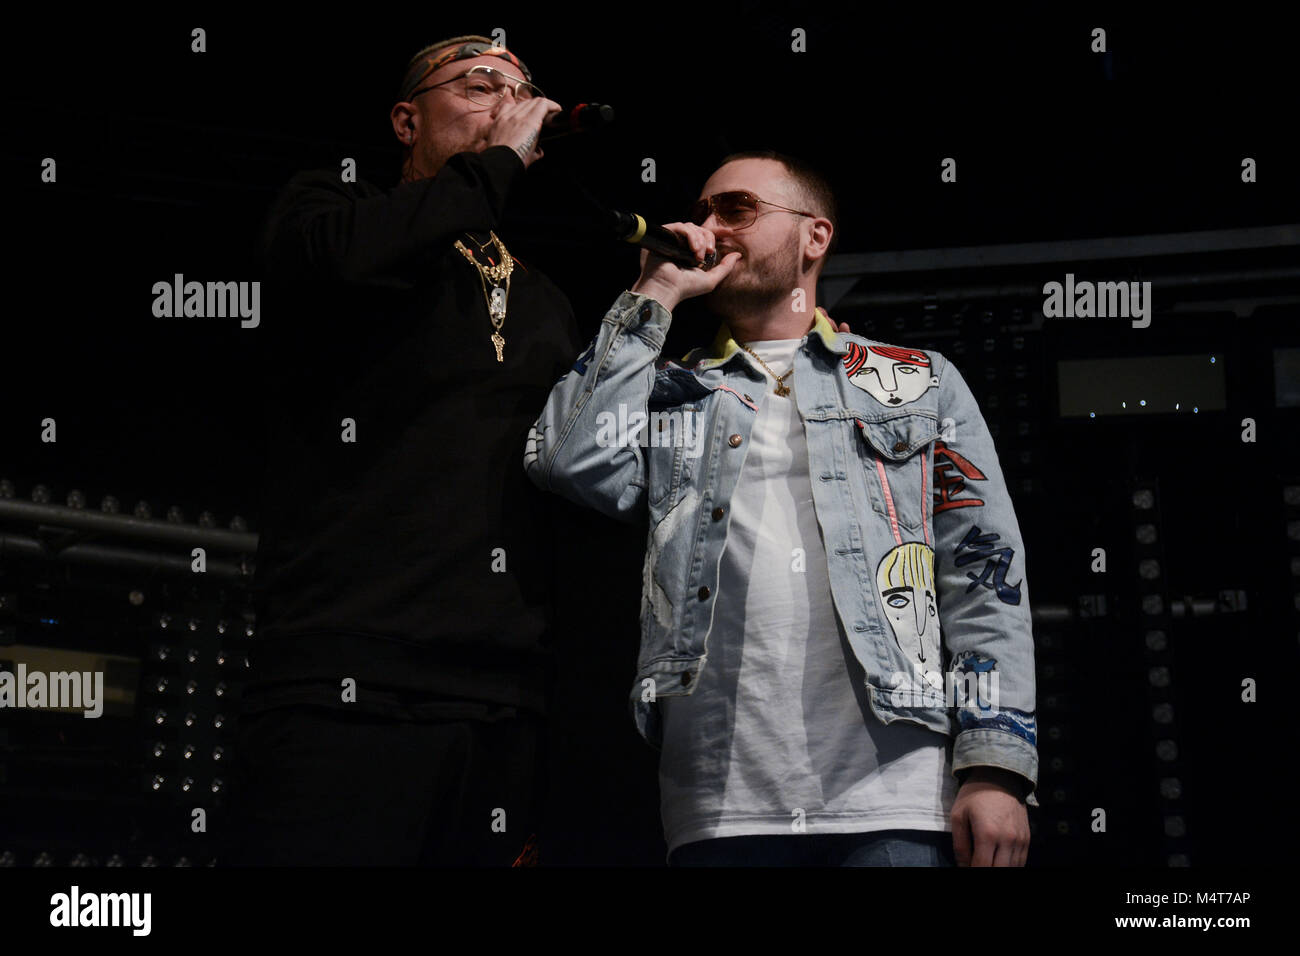 Naples, Italy. 17th Feb, 2018. The italian rapper Gué Pequeno performs on the stage for his tour 'Gentleman Tour 2018' at Casa della Musica in Naples, Italy. Credit: Mariano Montella/Alamy Live News Stock Photo